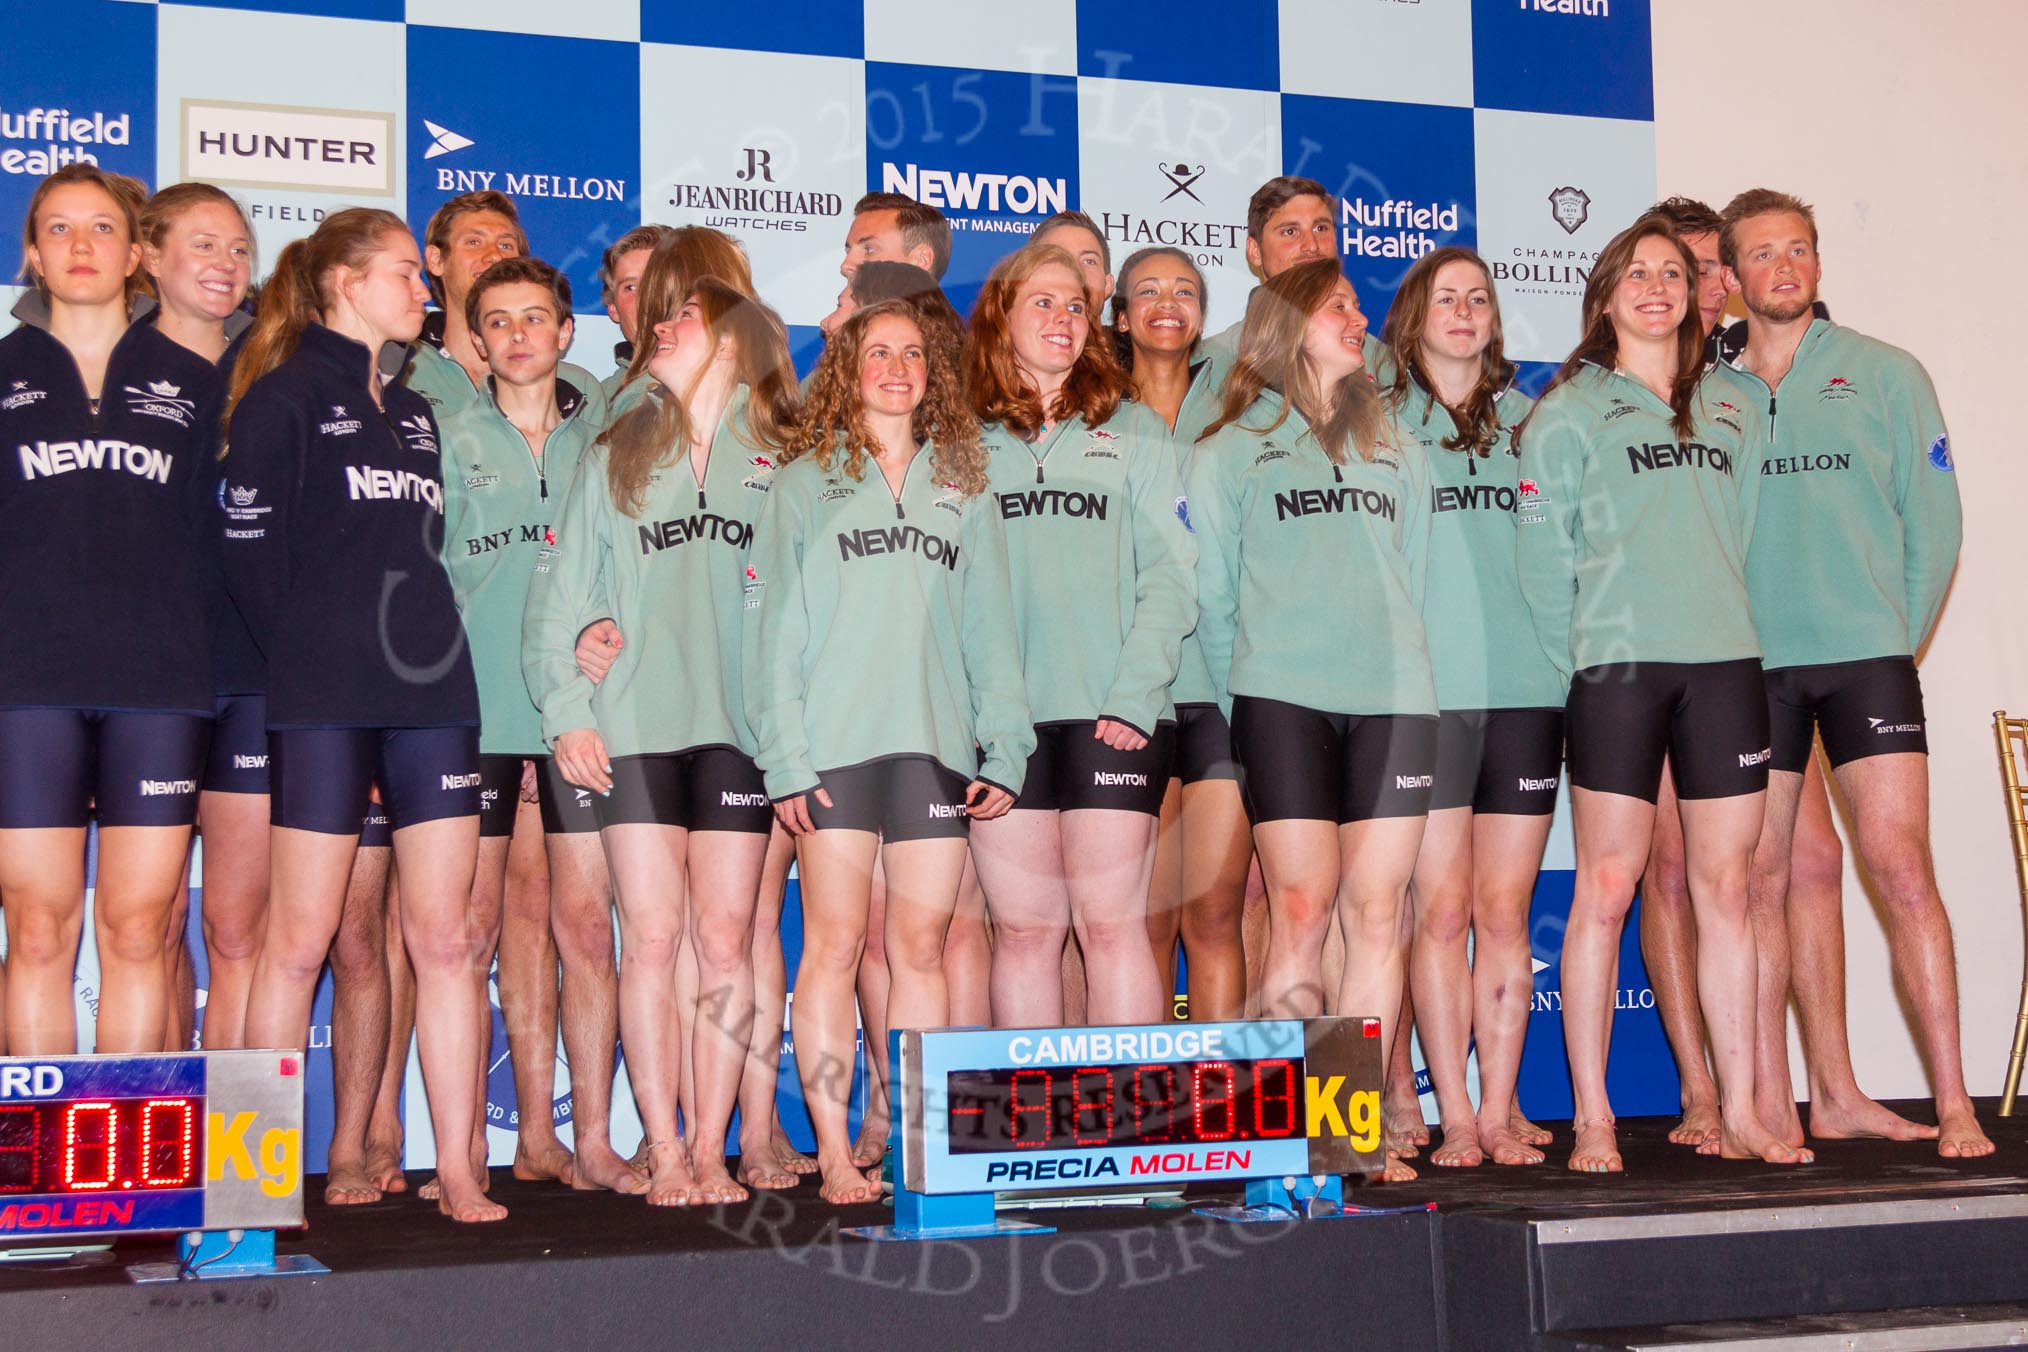 The 2015 Women's Boat Race and Boat Race Cambridge Blue Boat crews together